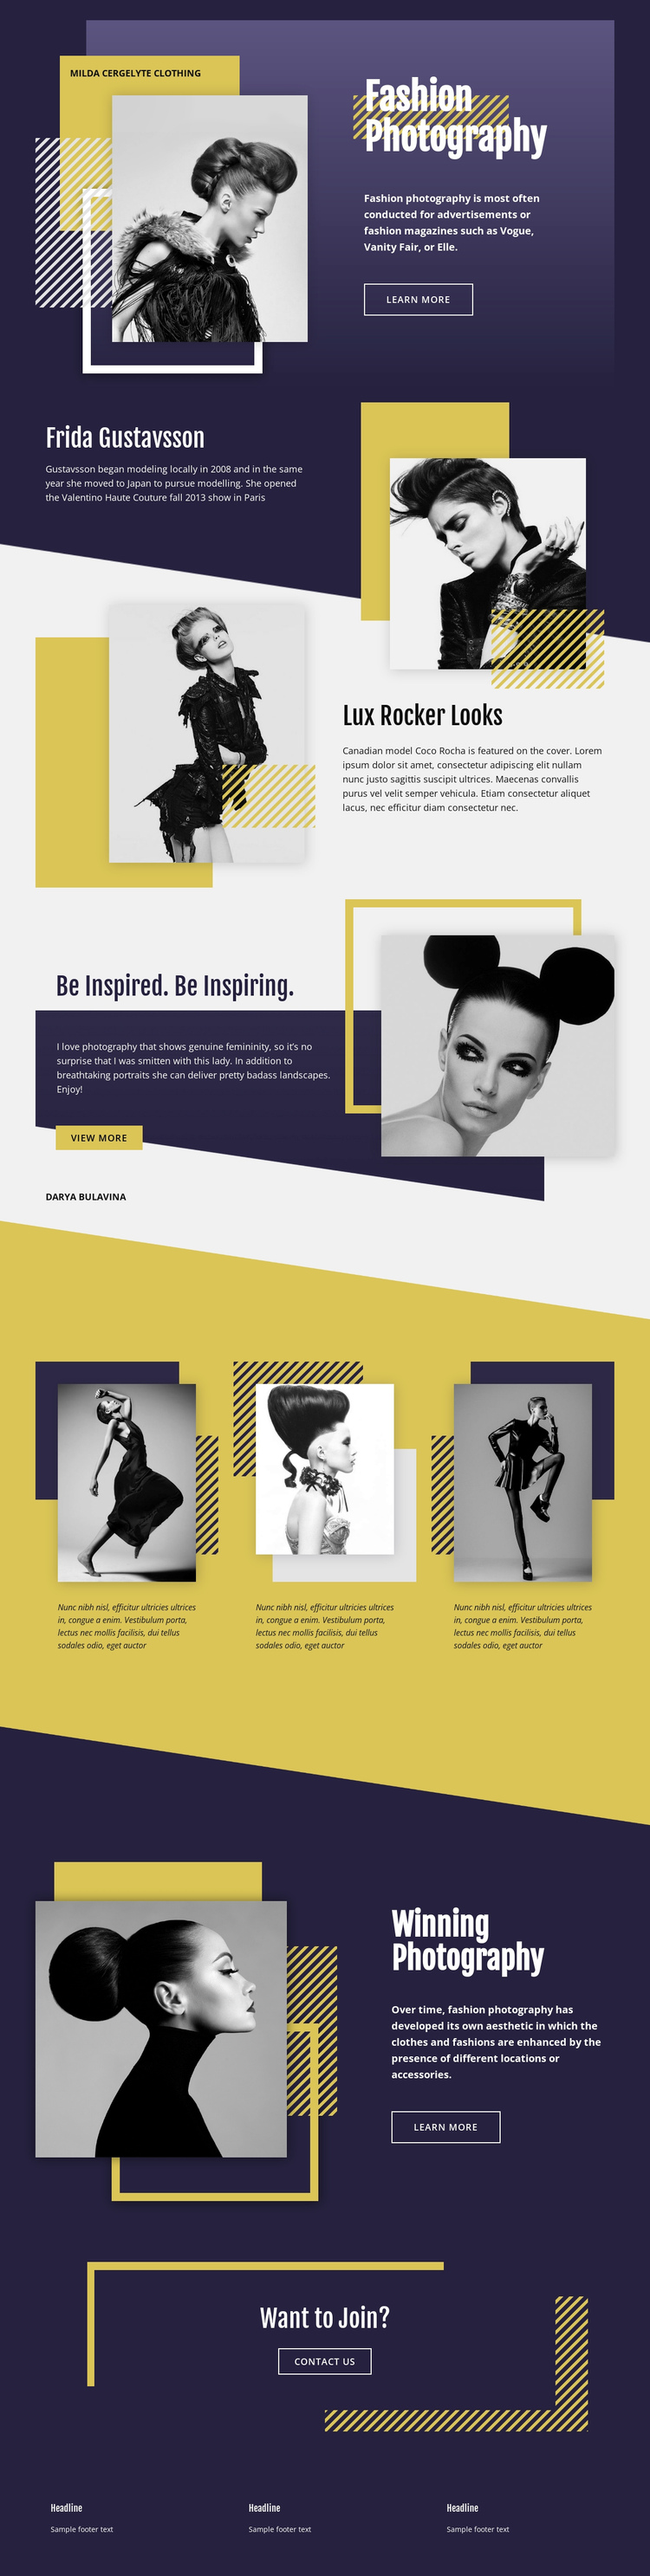 Fashion Photography Overlapping Website Builder Software